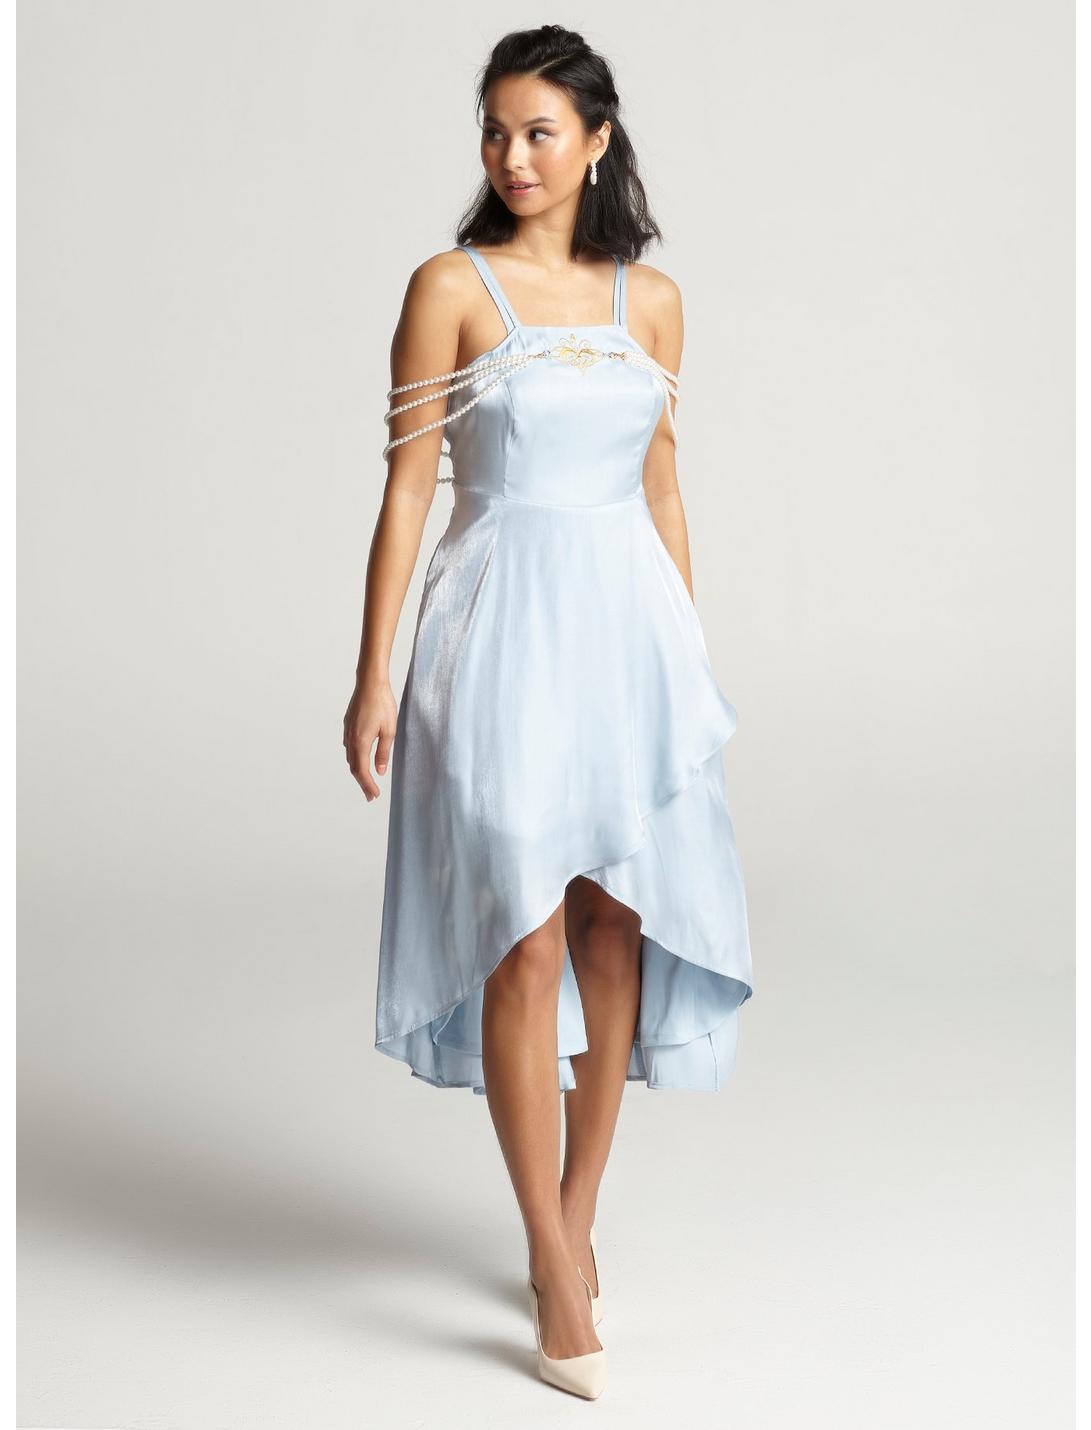 Her Universe Star Wars Padme Pearl Strap Dress Her Universe Exclusive, LIGHT BLUE, hi-res